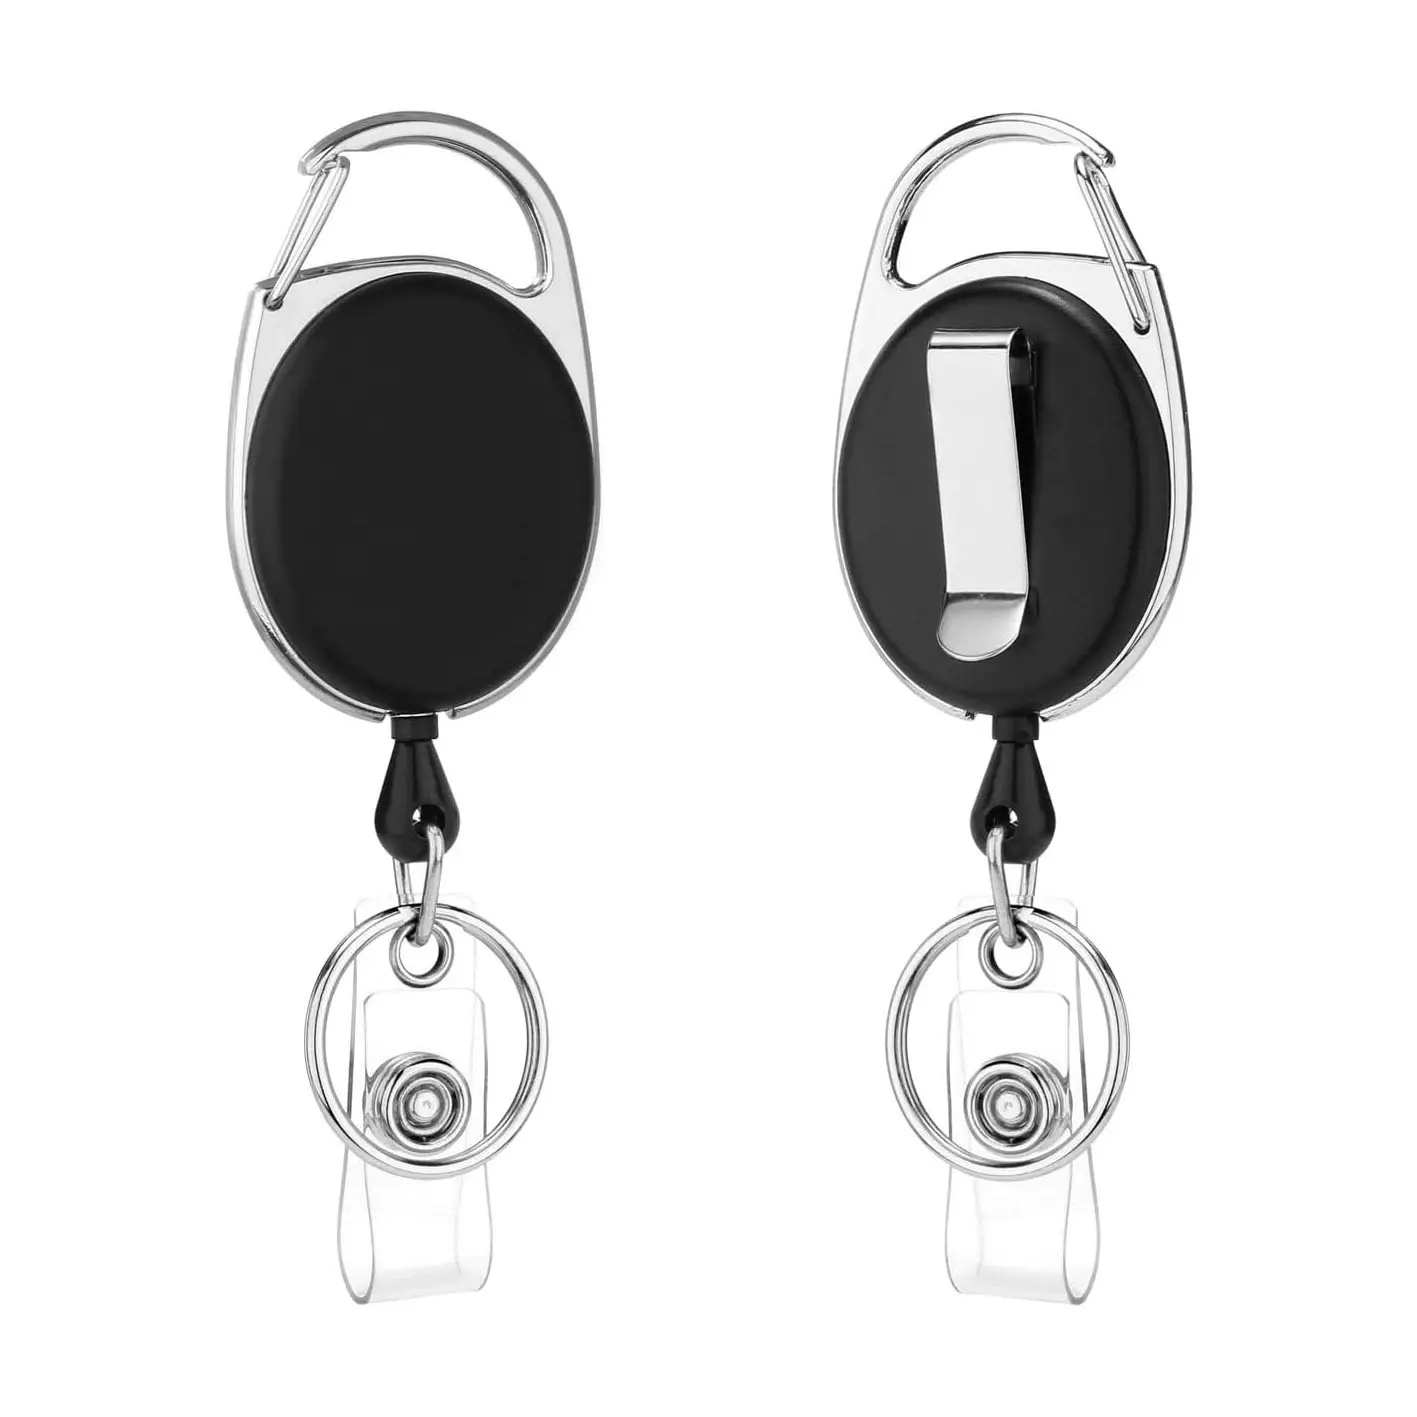 Retractable Badge Holders with Carabiner Key Ring Heavy Duty Key Holder Self Retractable ID Badge Reels with Belt Clip